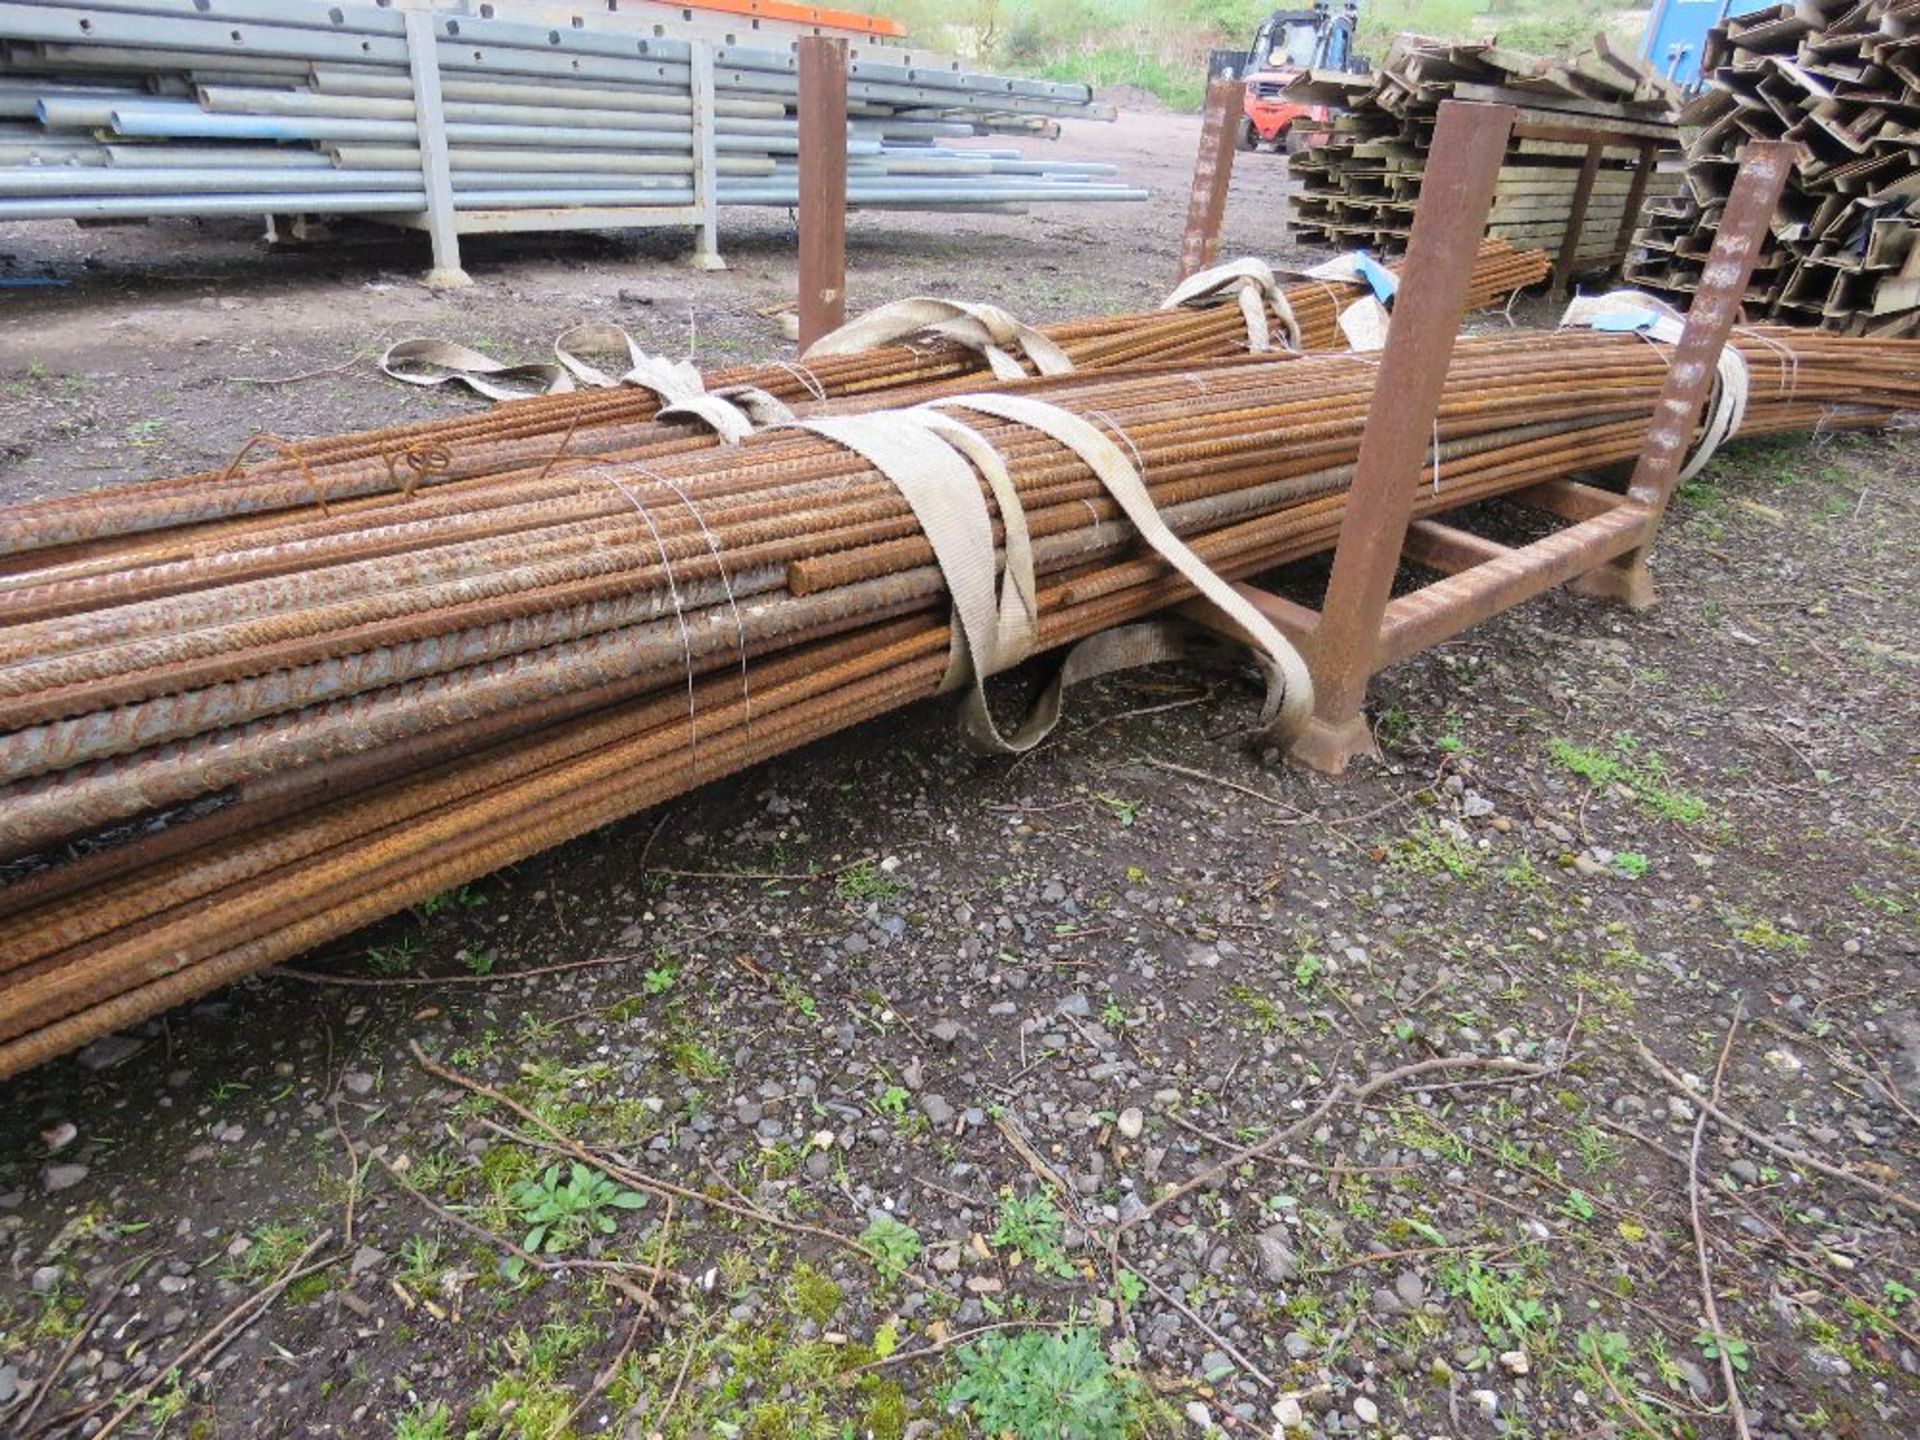 STILLAGE OF ASSORTED REBAR CONCRETE REINFORCING BAR 6FT -22FT APPROX SOURCED FROM COMPANY LIQUIDATI - Image 7 of 7